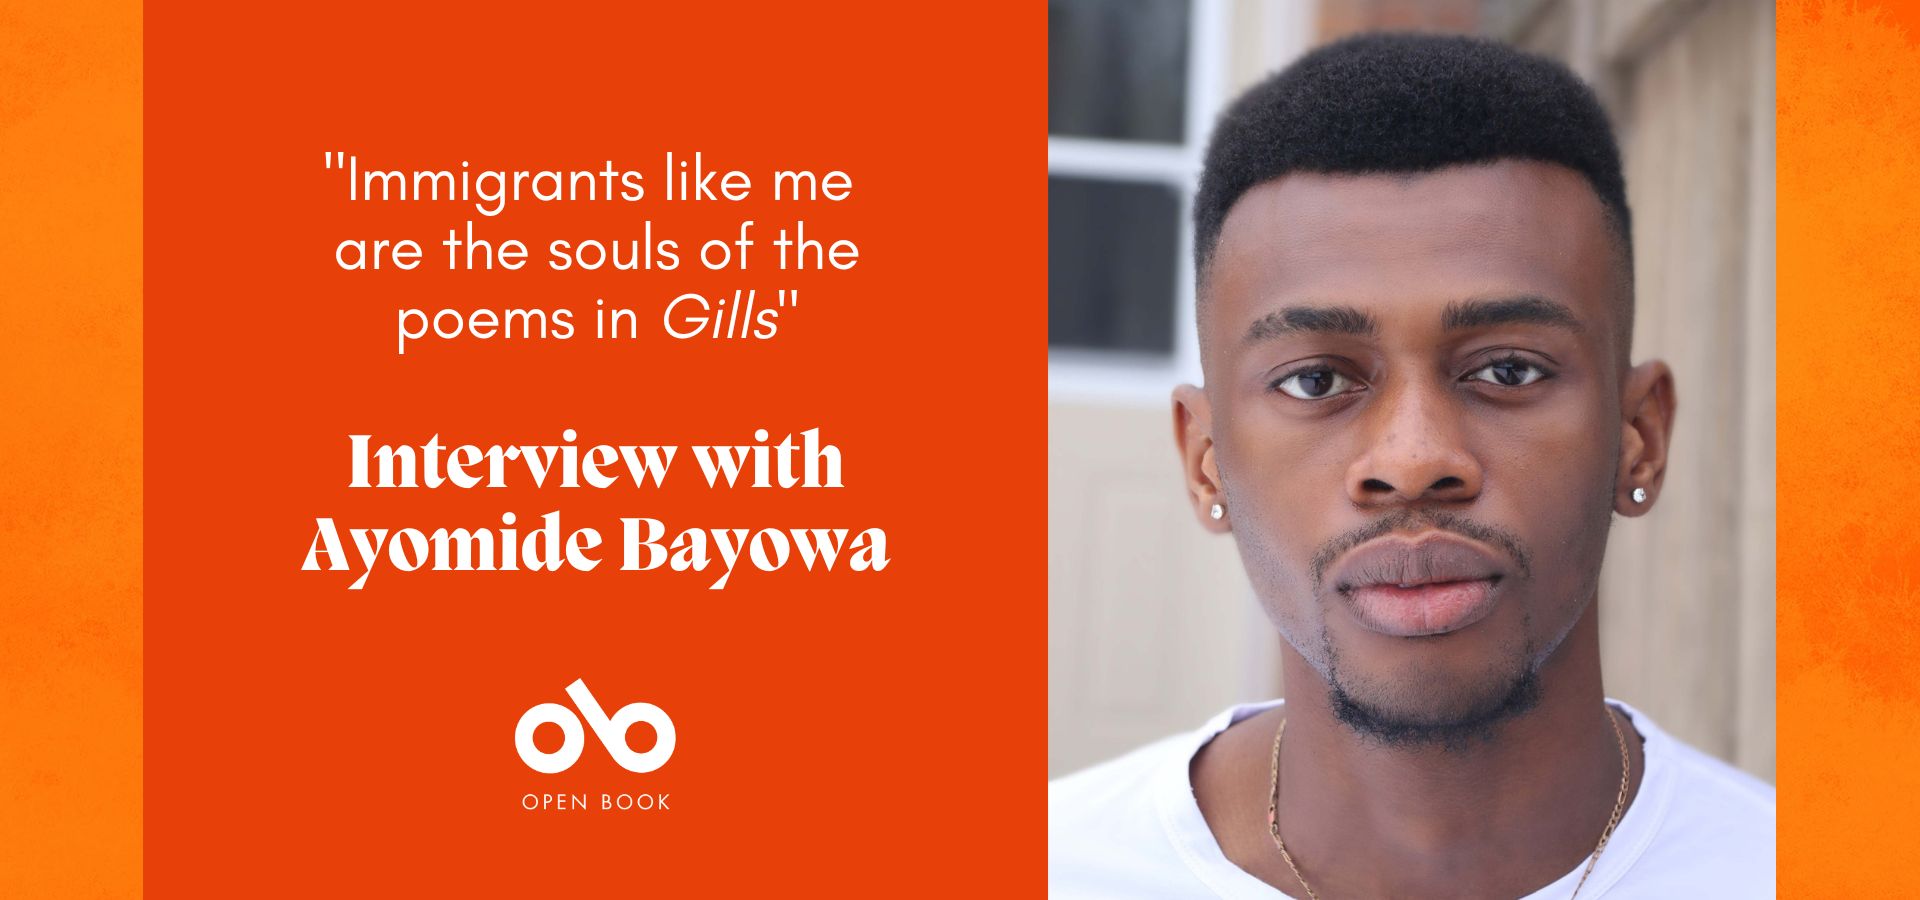 Orange banner image with photo of poet Ayomide Bayowa and the text '"Immigrants like me  are the souls of the poems in Gills" Interview with Ayomide Bayowa'